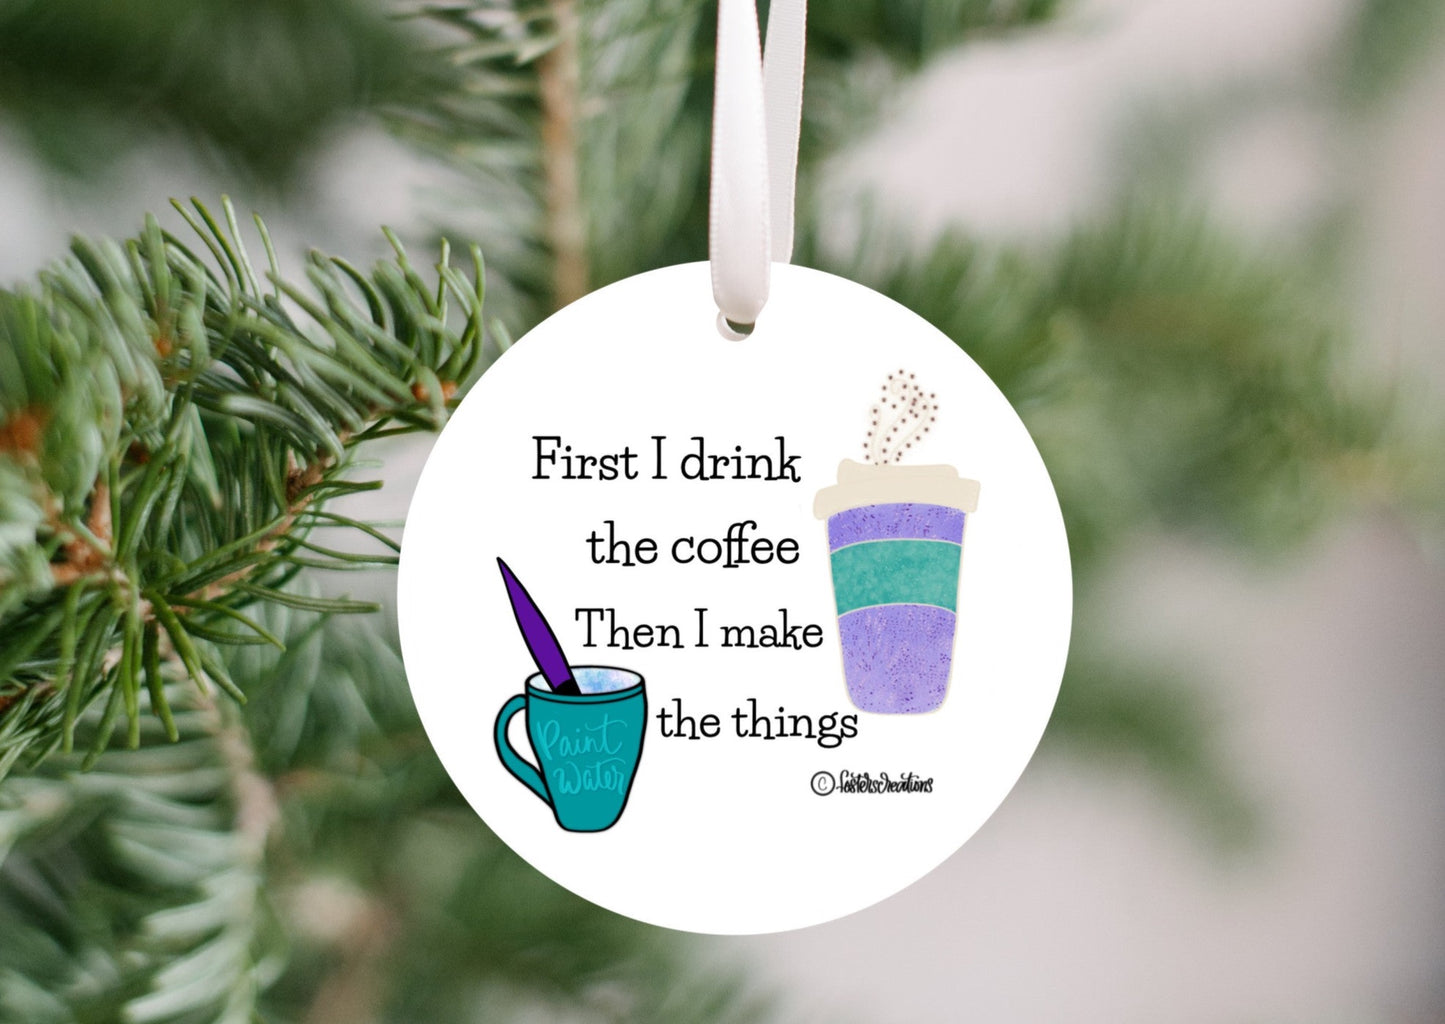 First I drink the coffee, then I make the things